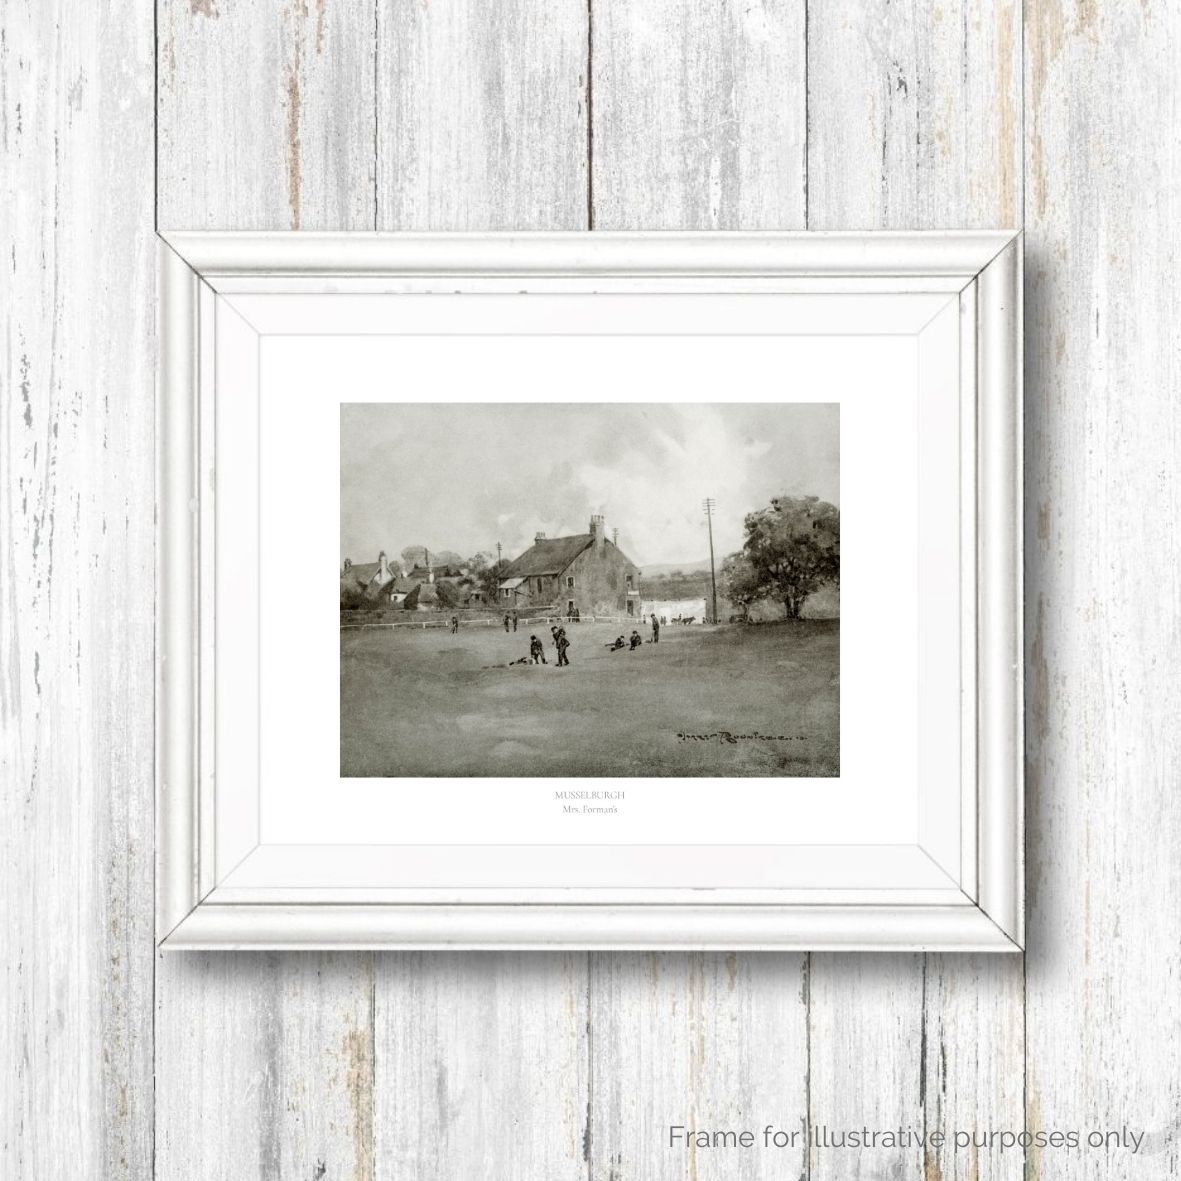 Framed print of Musselburgh golf links by Harry Rountree